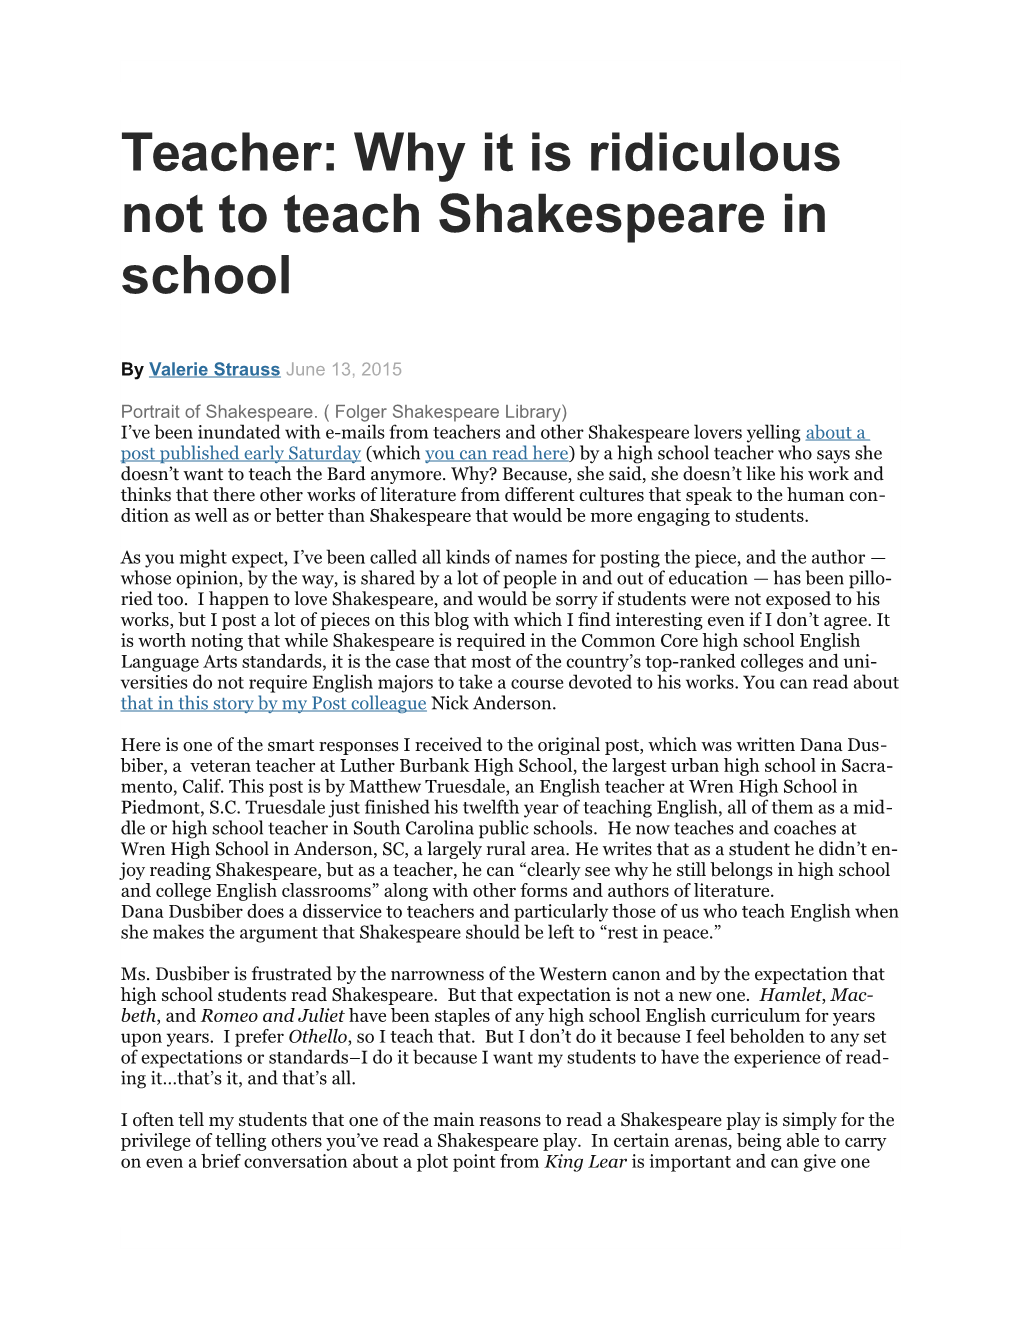 Teacher: Why It Is Ridiculous Not to Teach Shakespeare in School